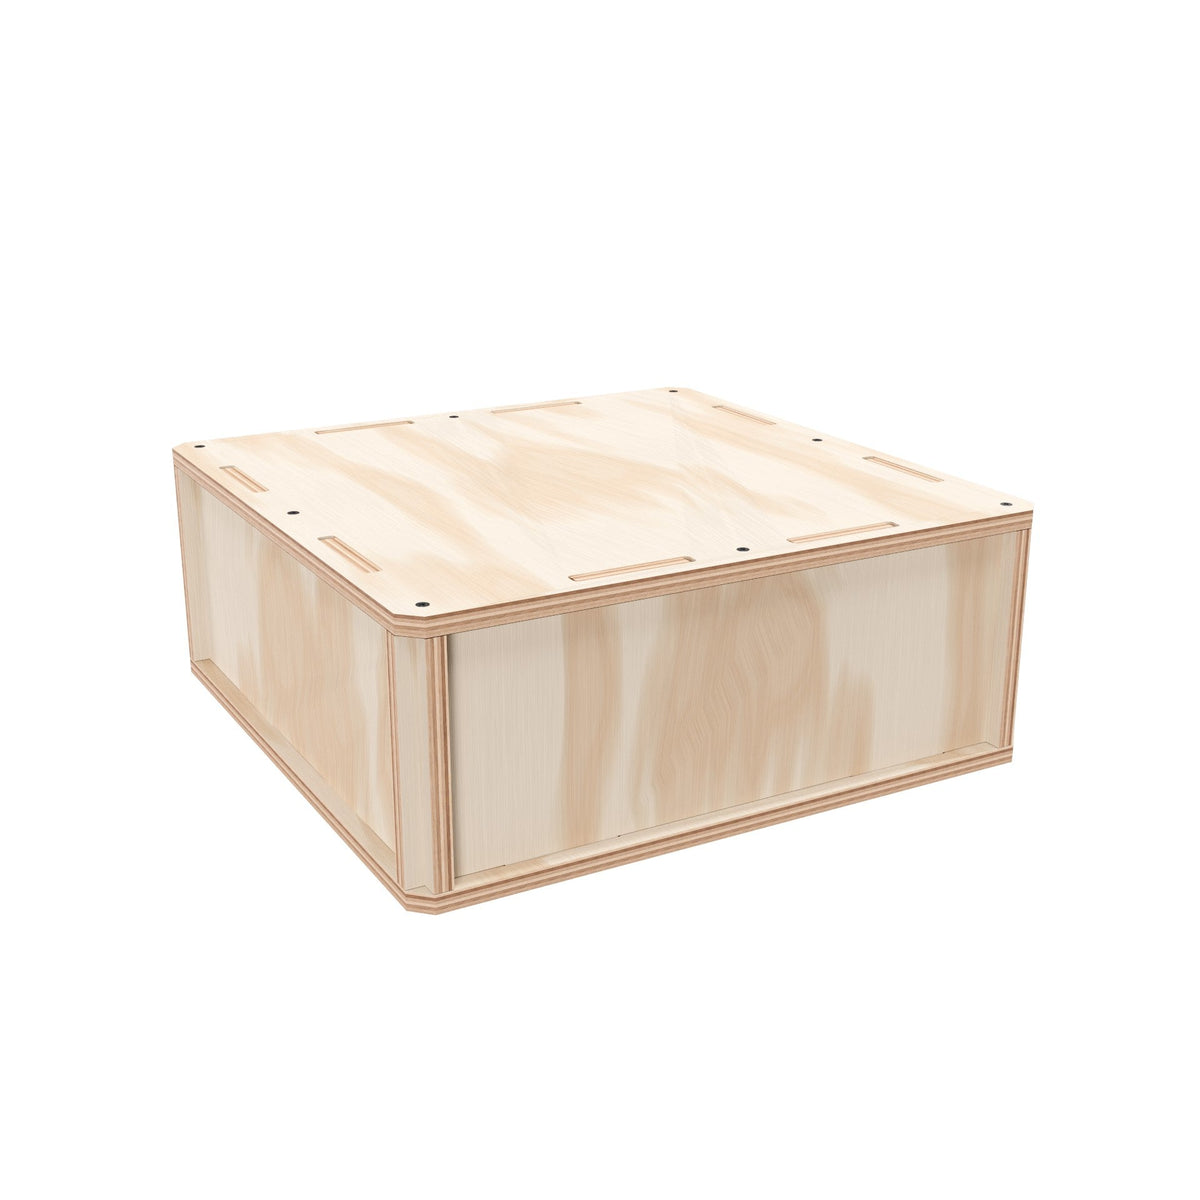 Plywood Shipping Crate 18x18x7